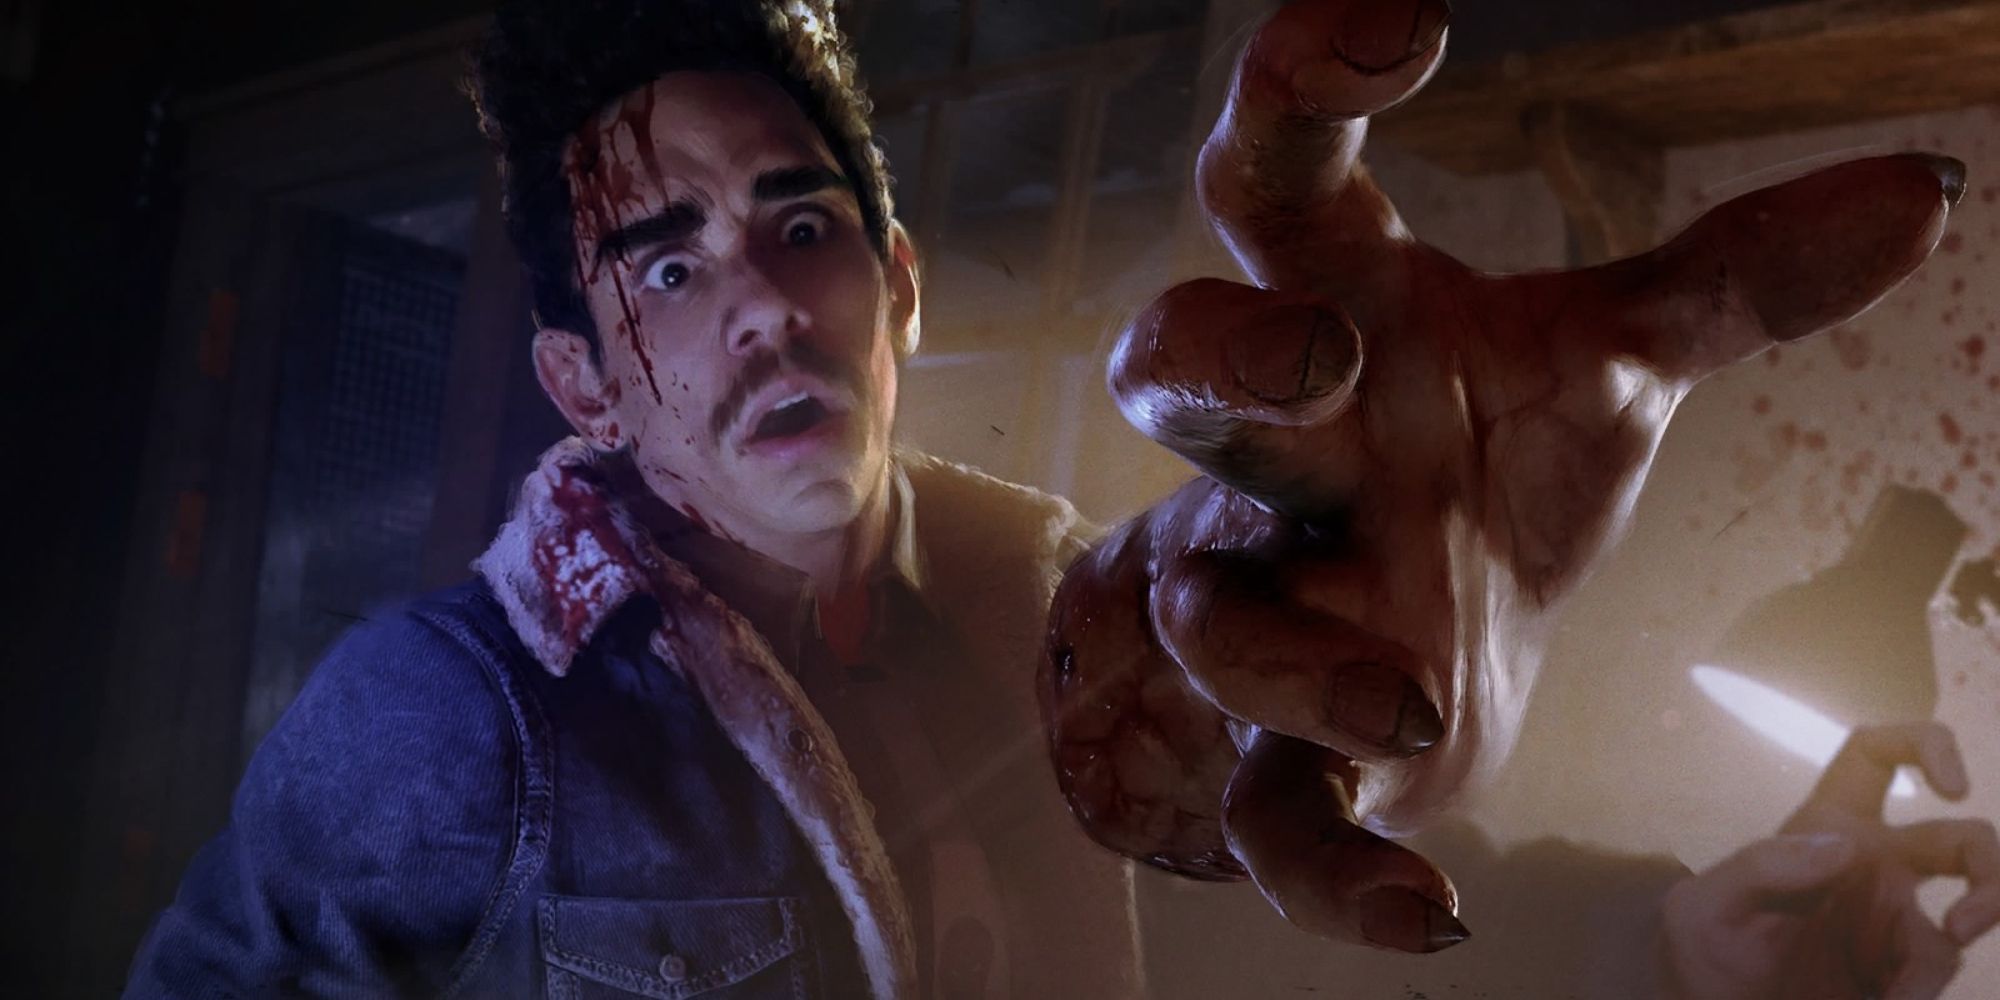 Tips for surviving and slaying in Evil Dead: The Game, out